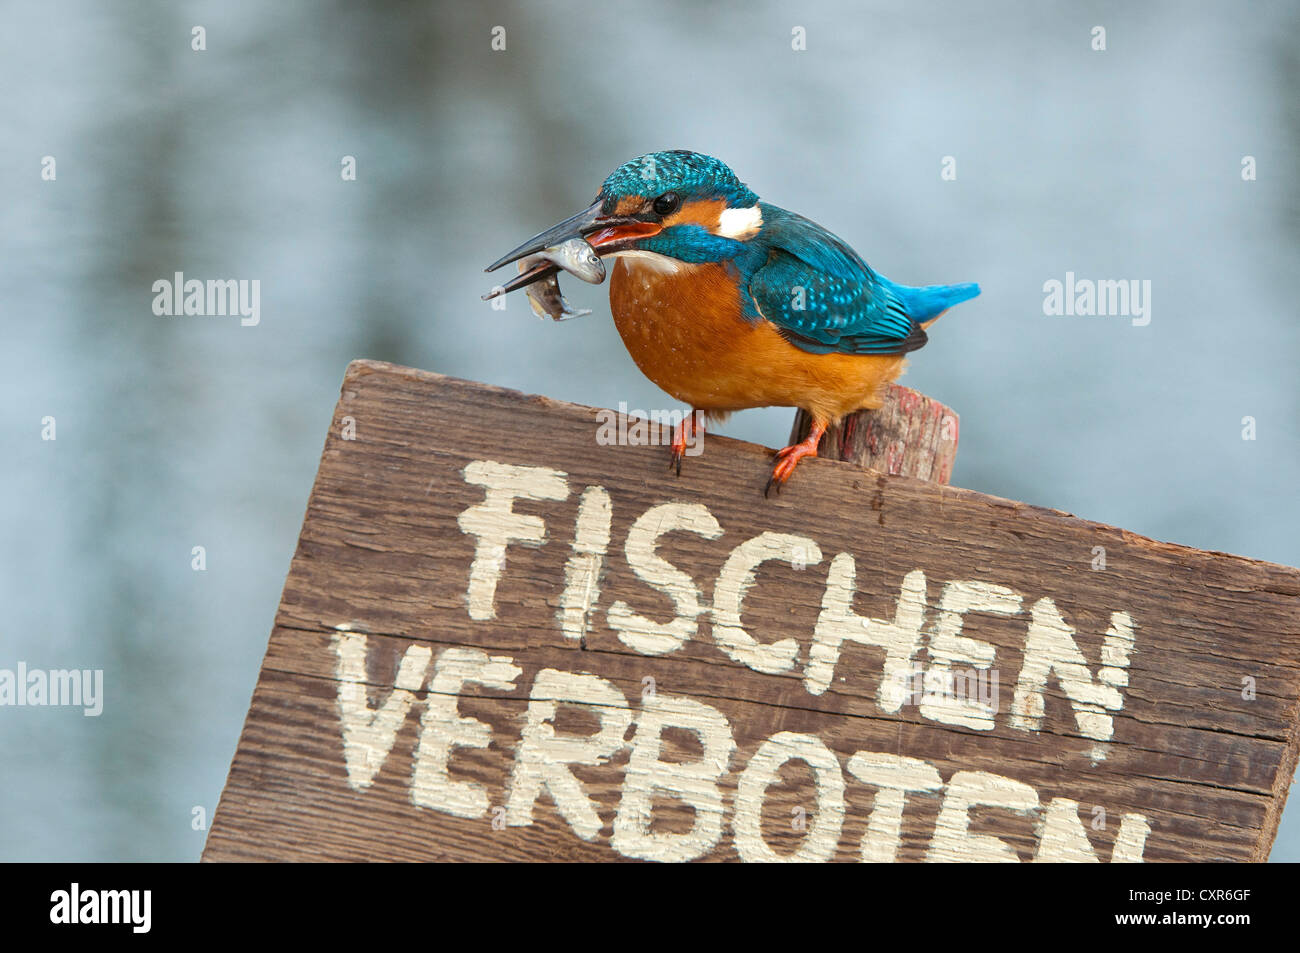 Kingfisher (Alcedo atthis), perched on a German 'no fishing' sign, Tratzberg landscape conservation area, Tyrol, Austria, Europe Stock Photo